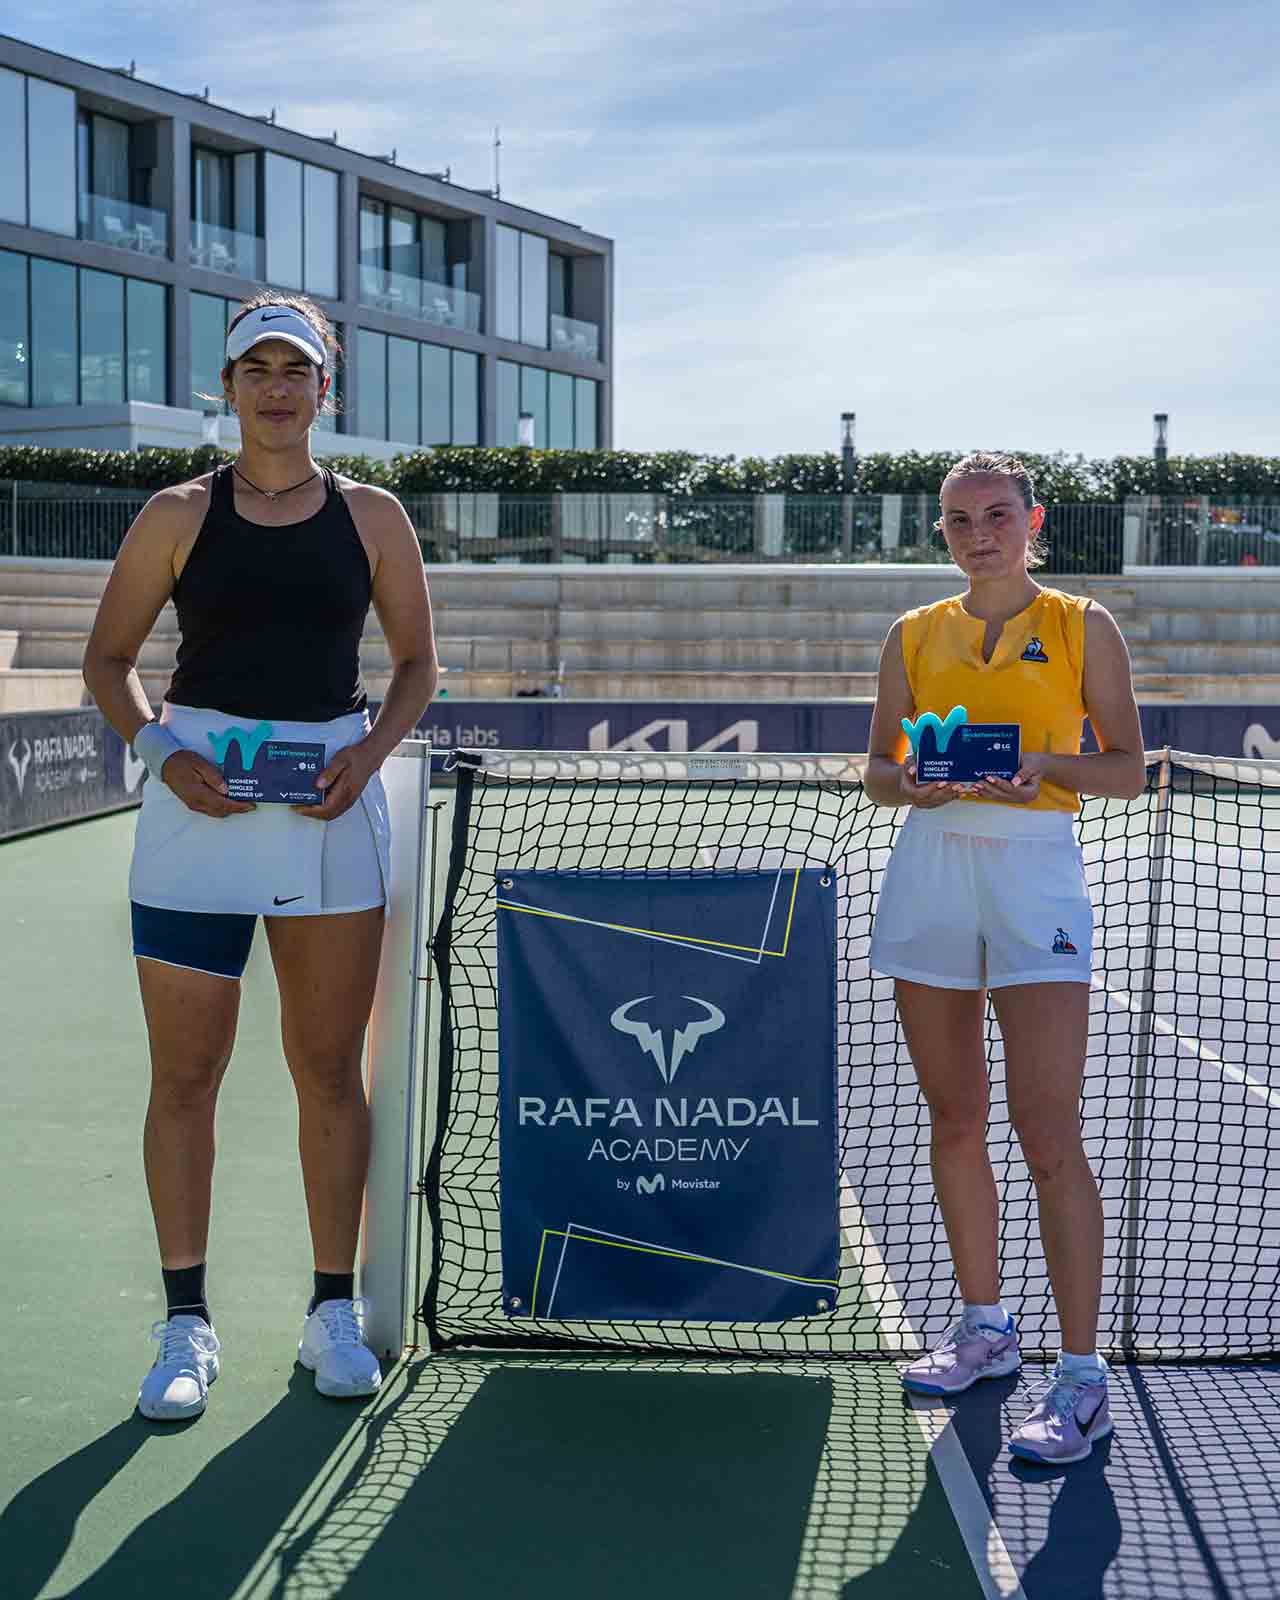 The best women’s tennis, at the Rafa Nadal Academy by Movistar